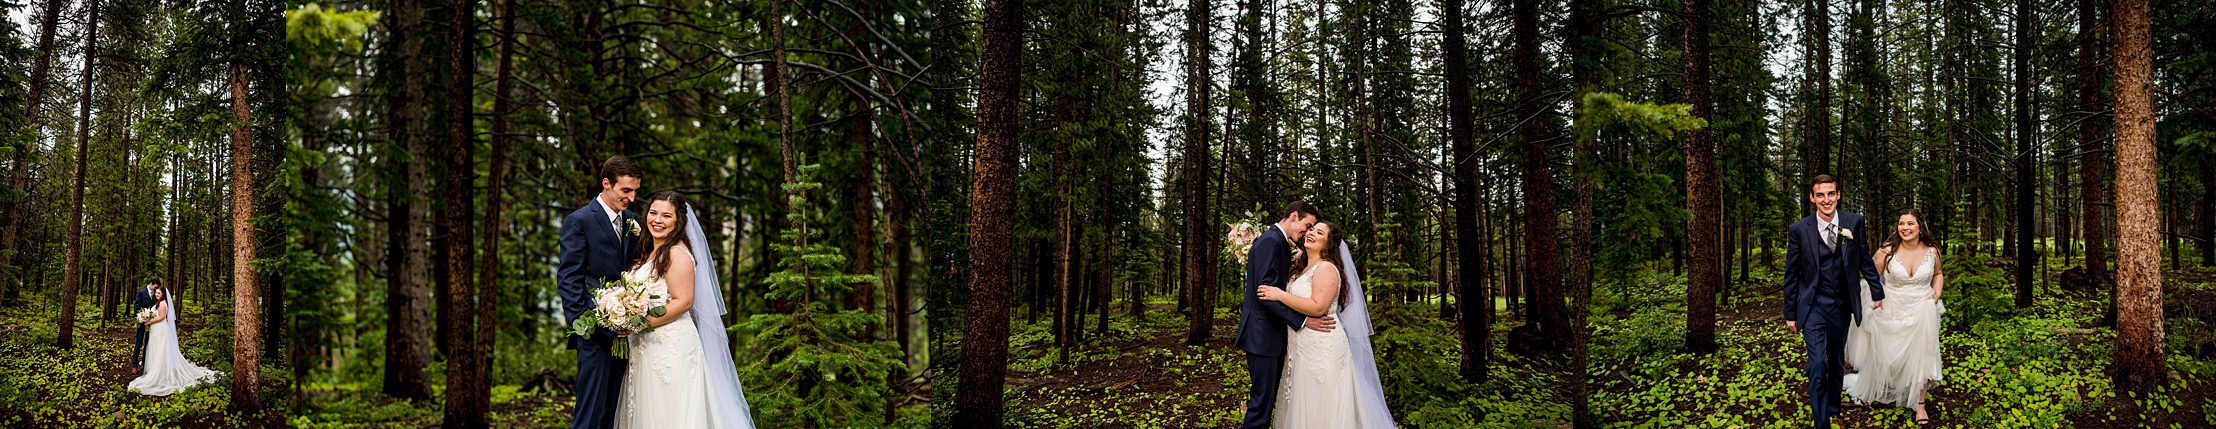 bride and groom in the trees of their Breckenridge wedding venue